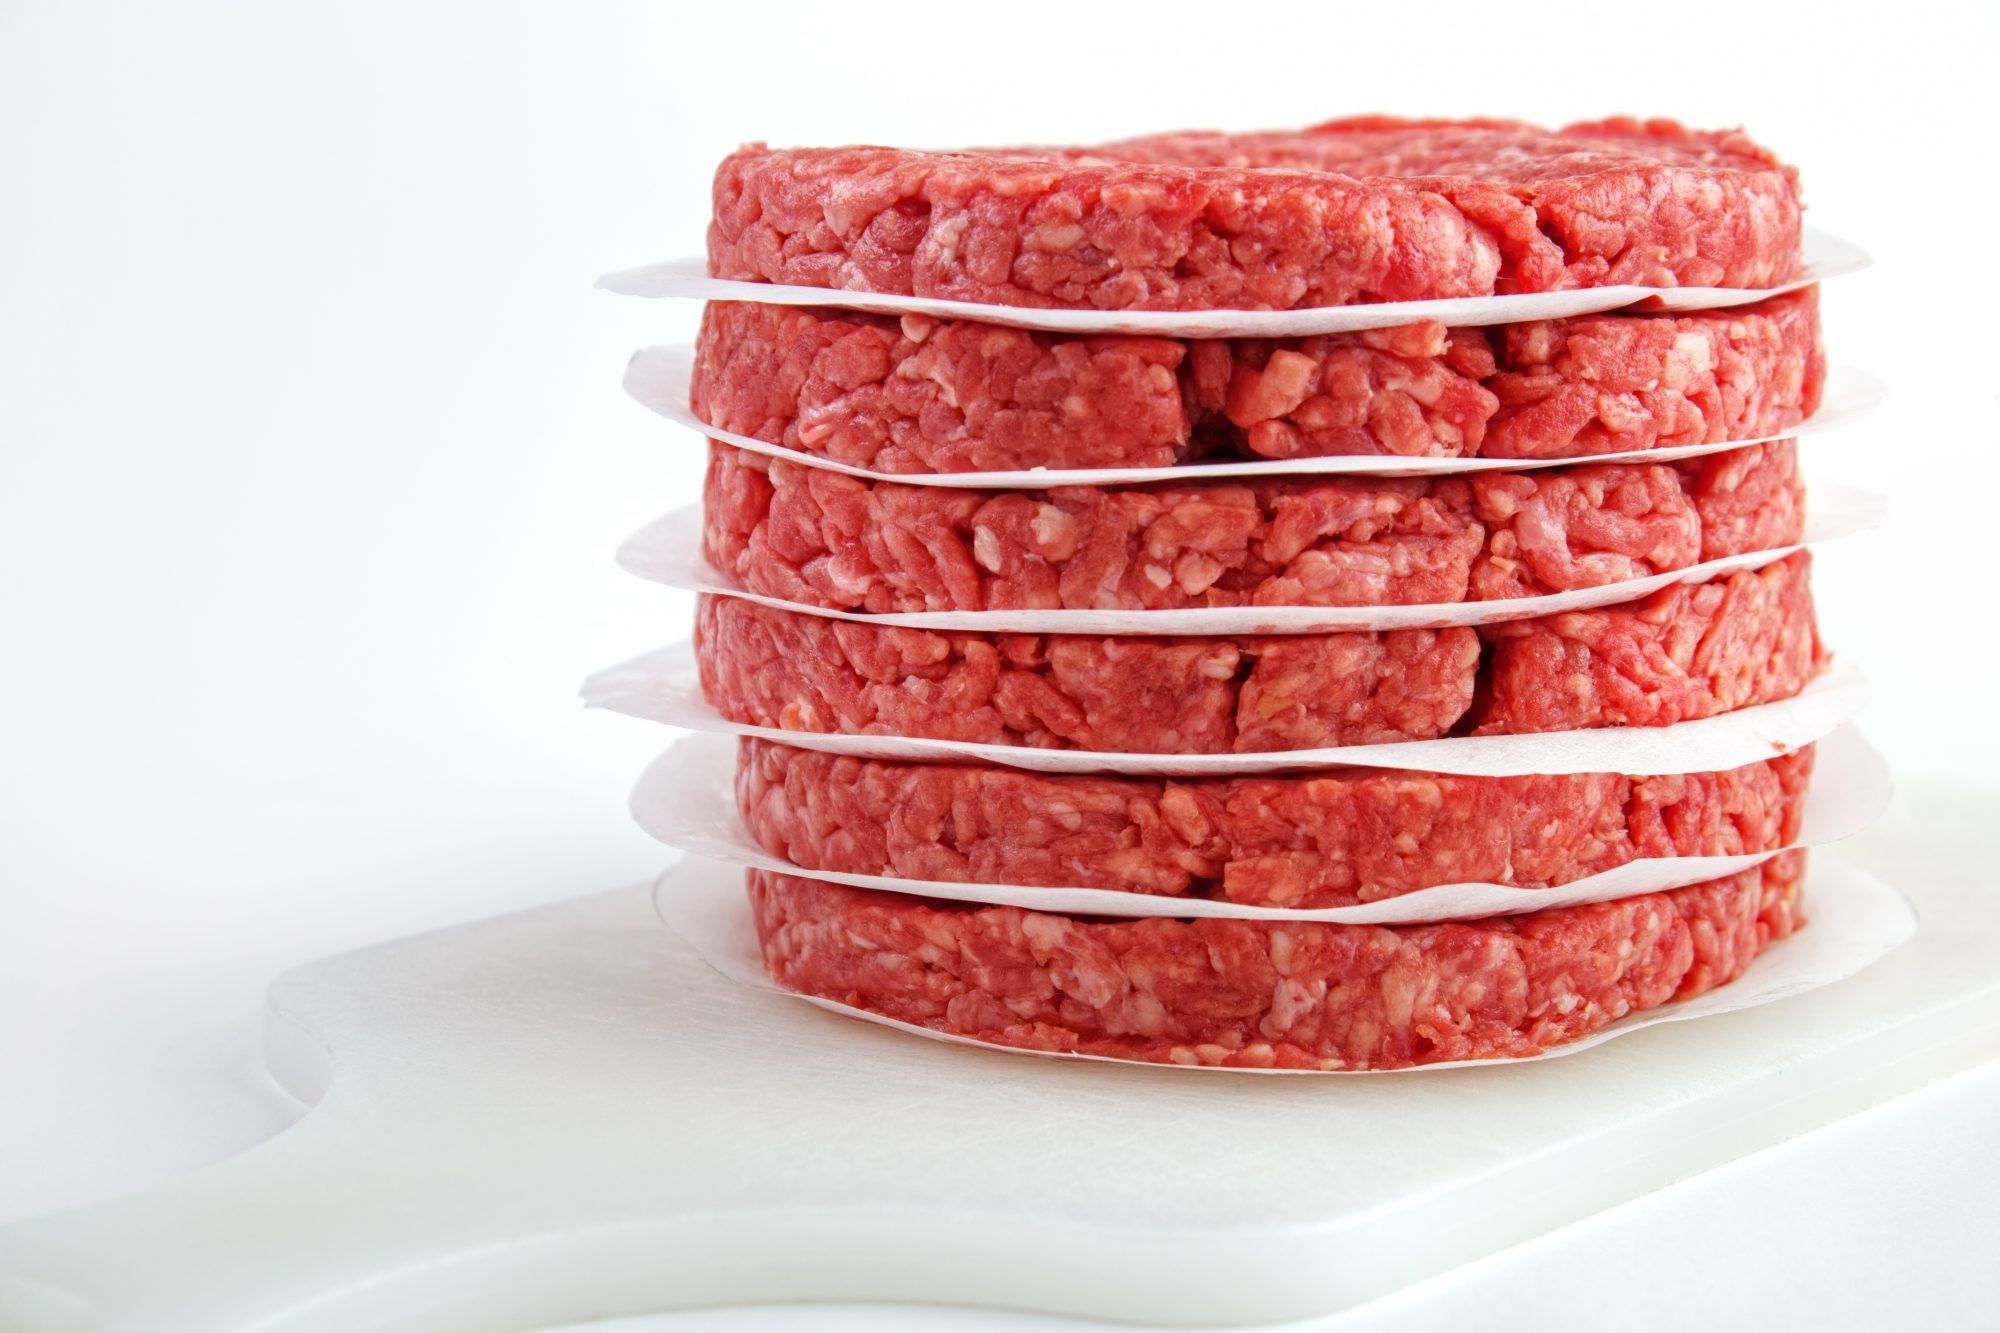 How To Store Hamburger Meat